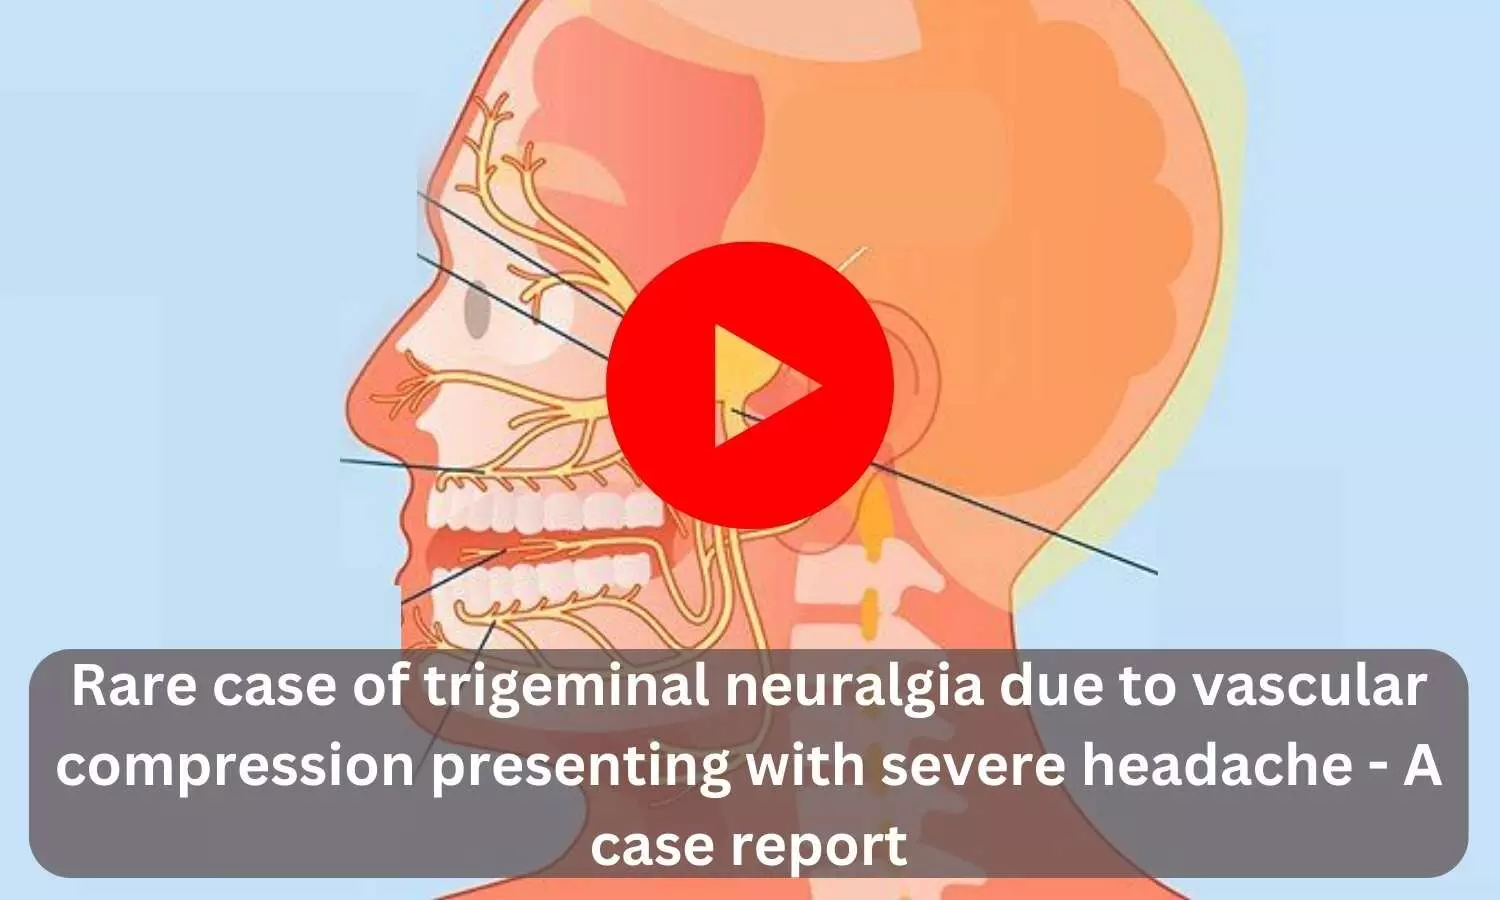 Rare case of trigeminal neuralgia due to vascular compression presenting with severe headache - A case report